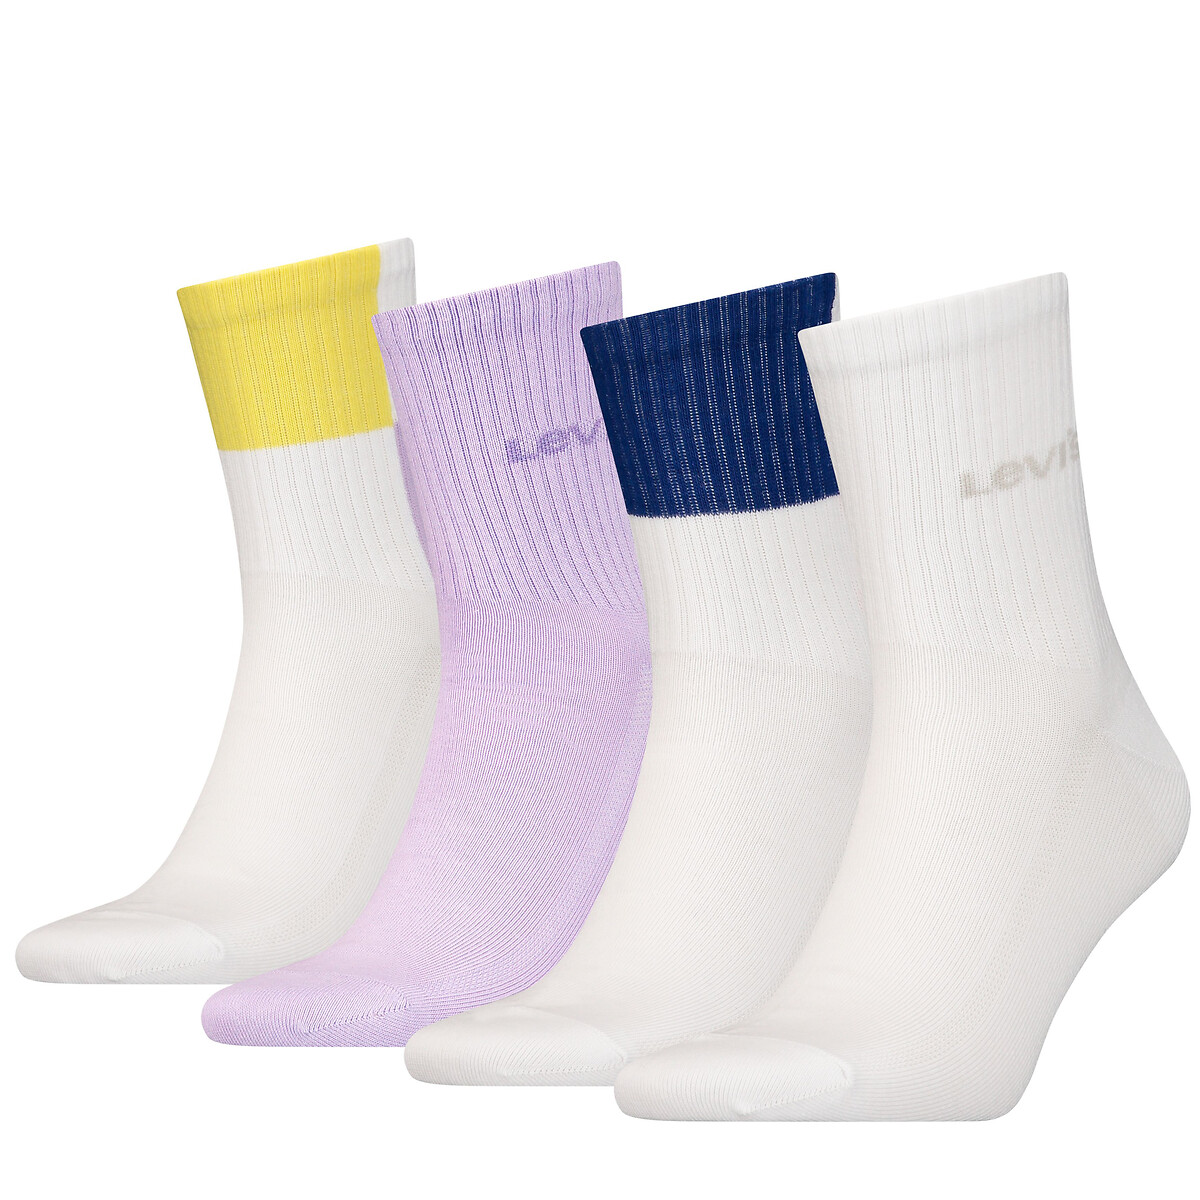 Image of Gift Set of 4 Pairs of Crew Socks in Cotton Mix